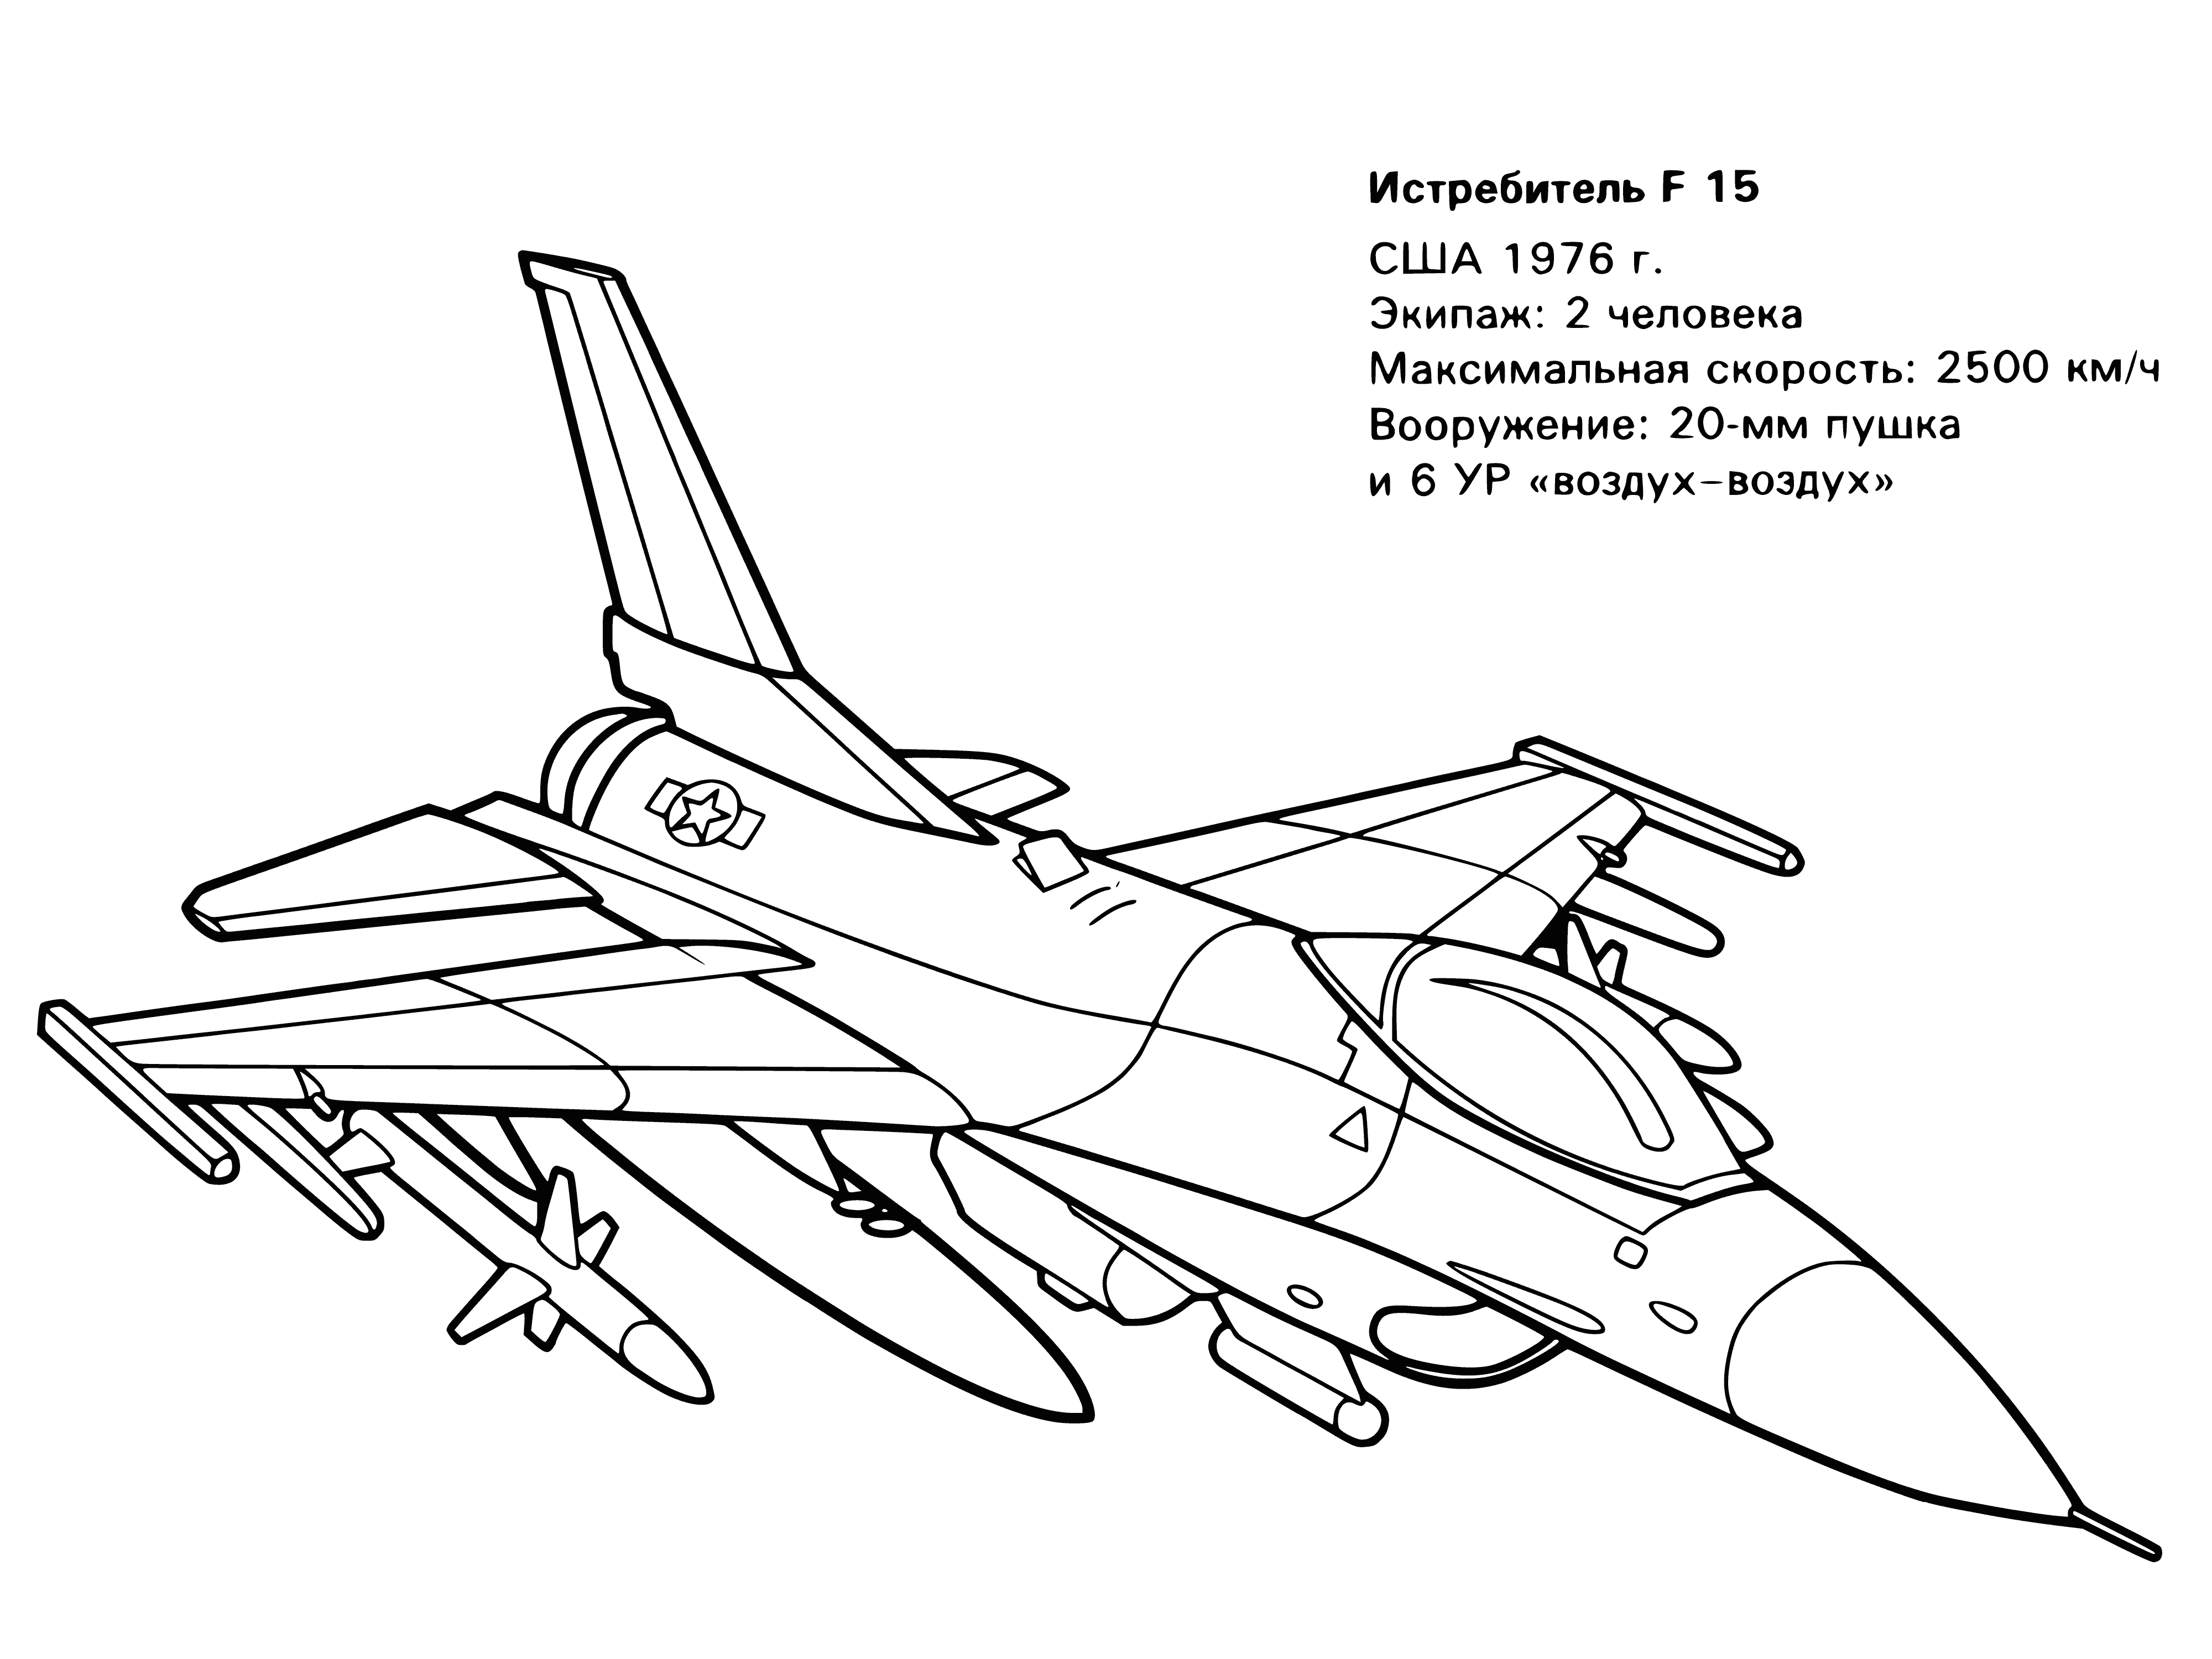 1976 USA fighter coloring page